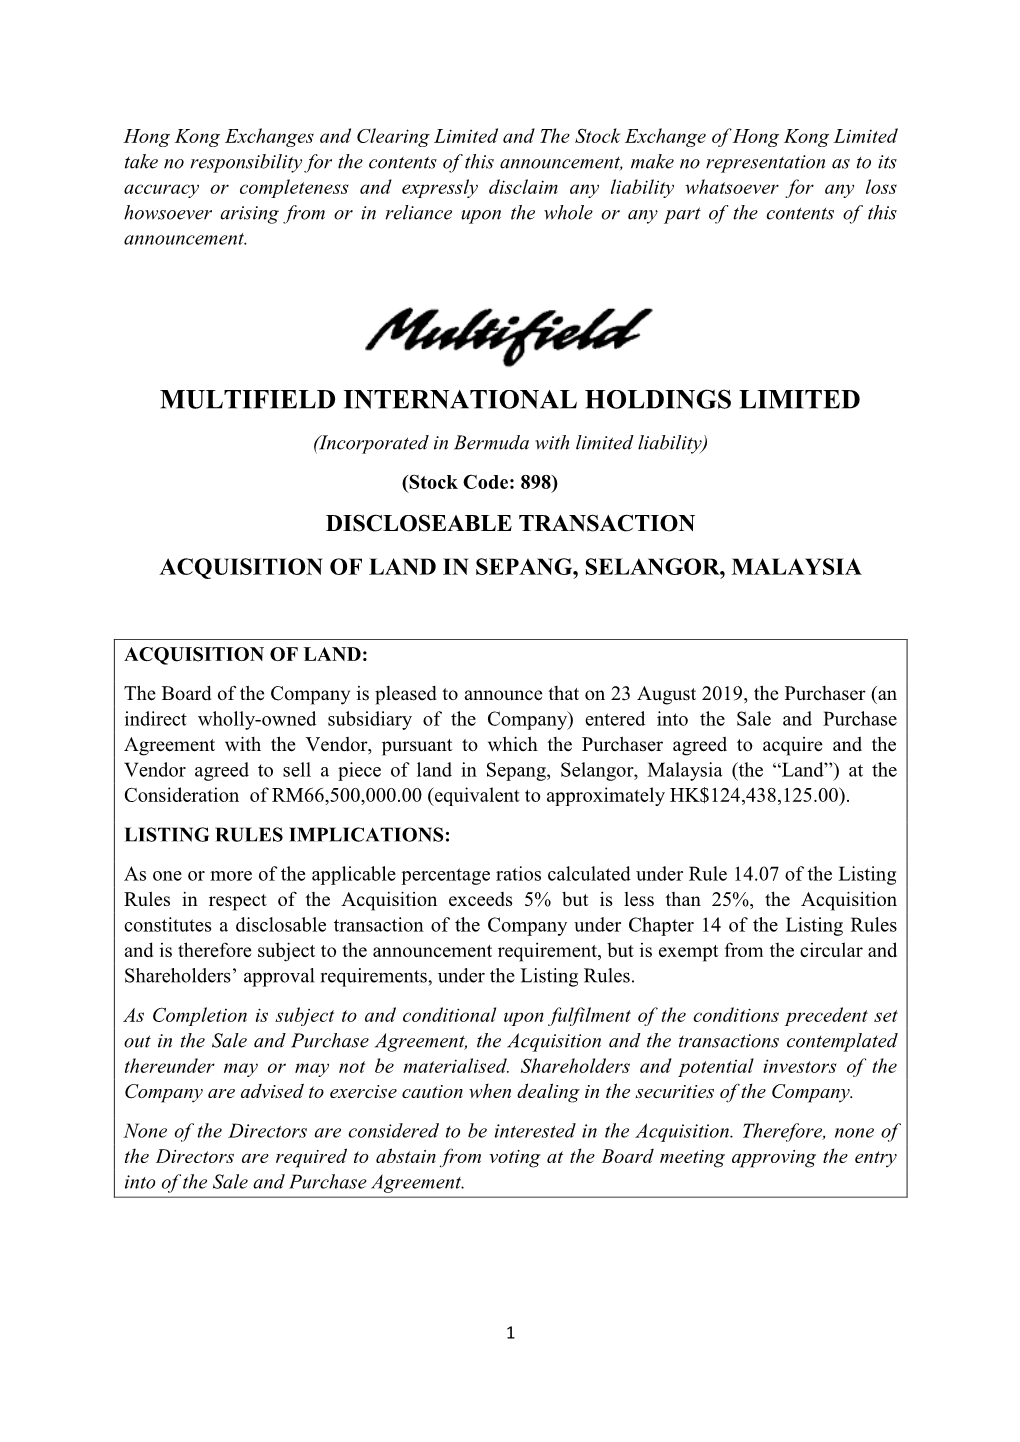 MULTIFIELD INTERNATIONAL HOLDINGS LIMITED (Incorporated in Bermuda with Limited Liability)